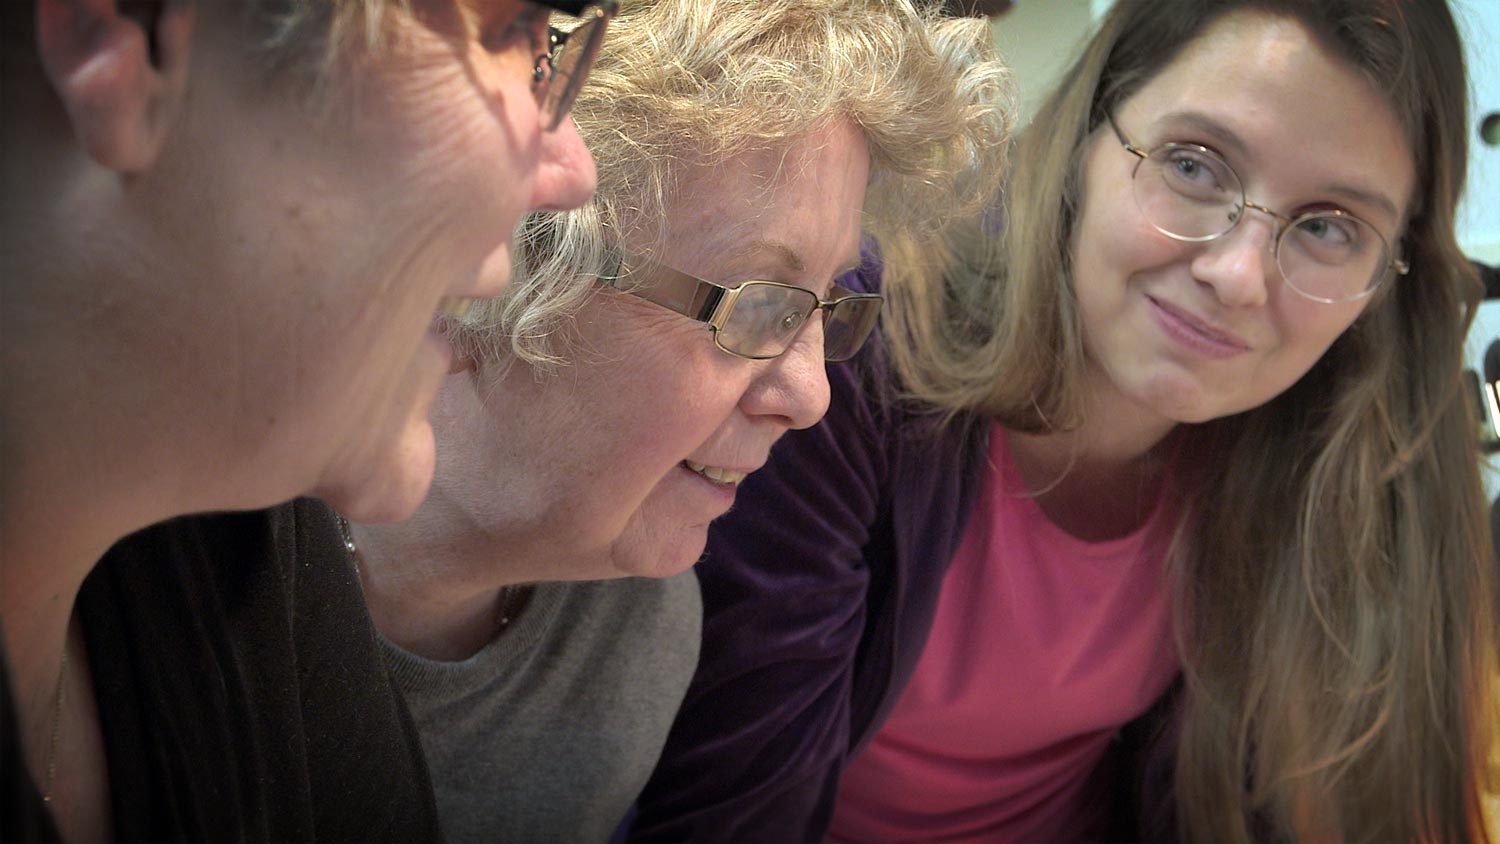 Faces of three women who were intently following a sewing course, but are  now smiling to each other.